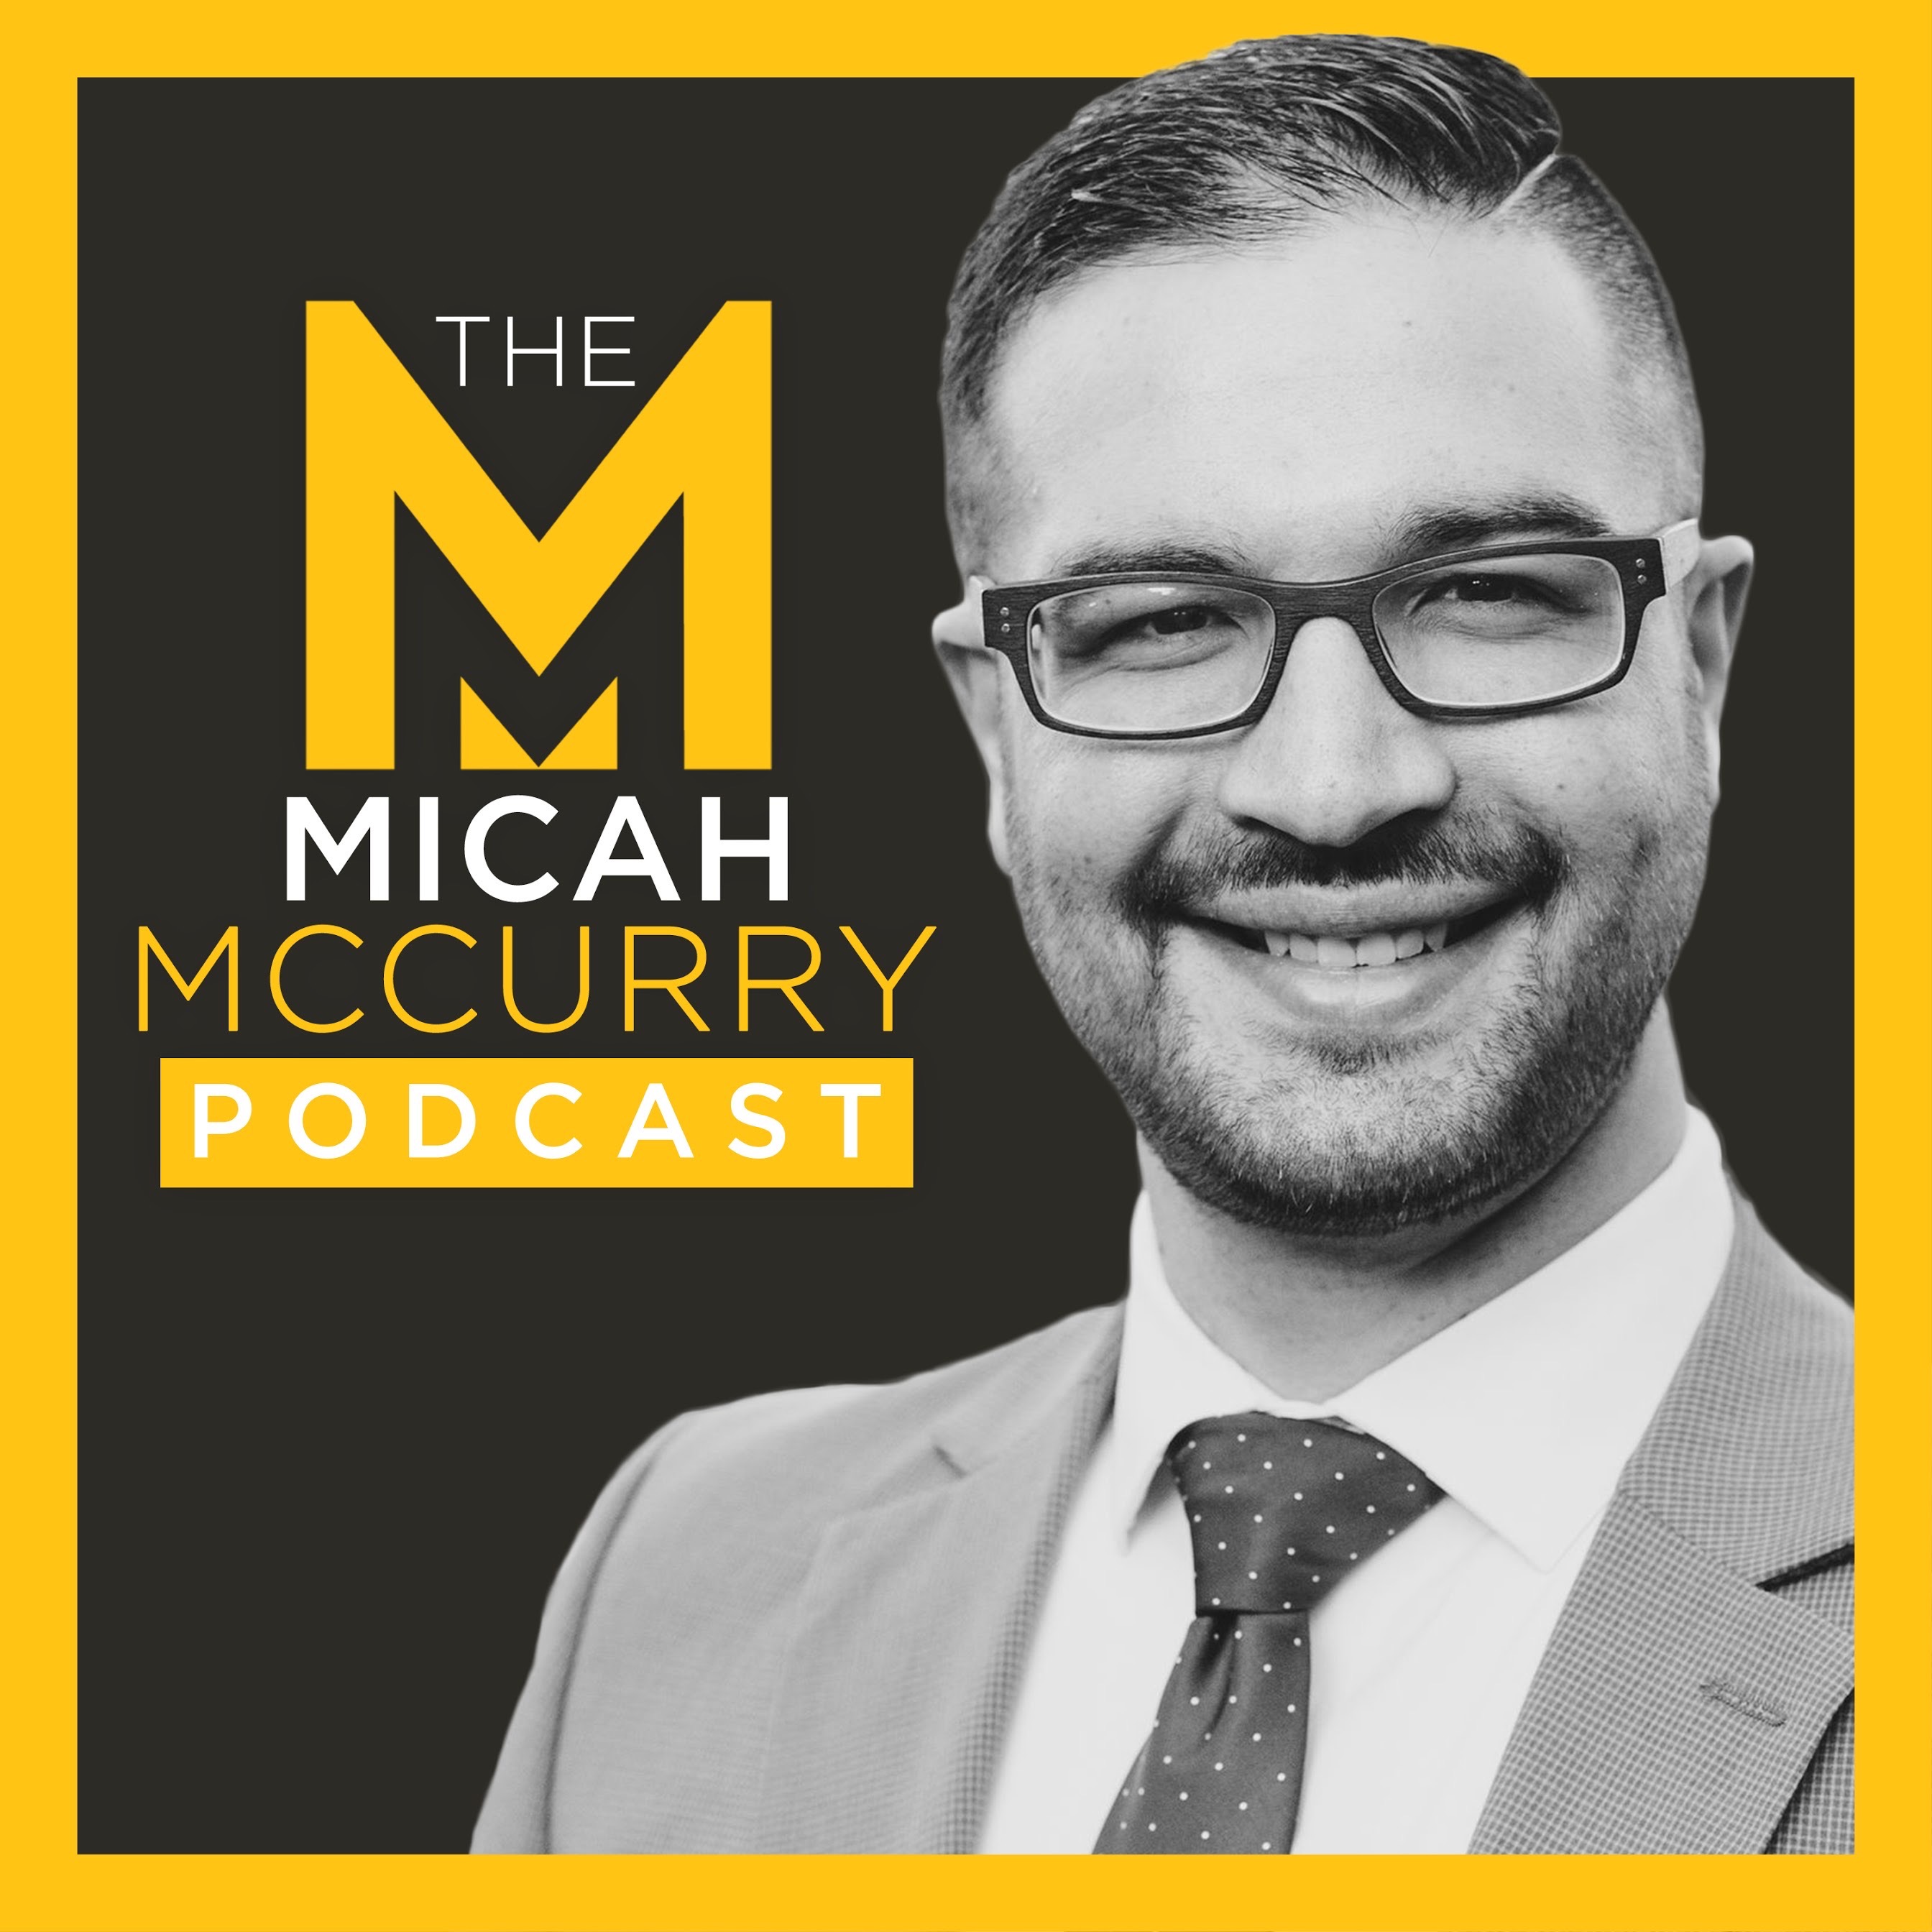 Merry Christmas from the Micah McCurry Podcast